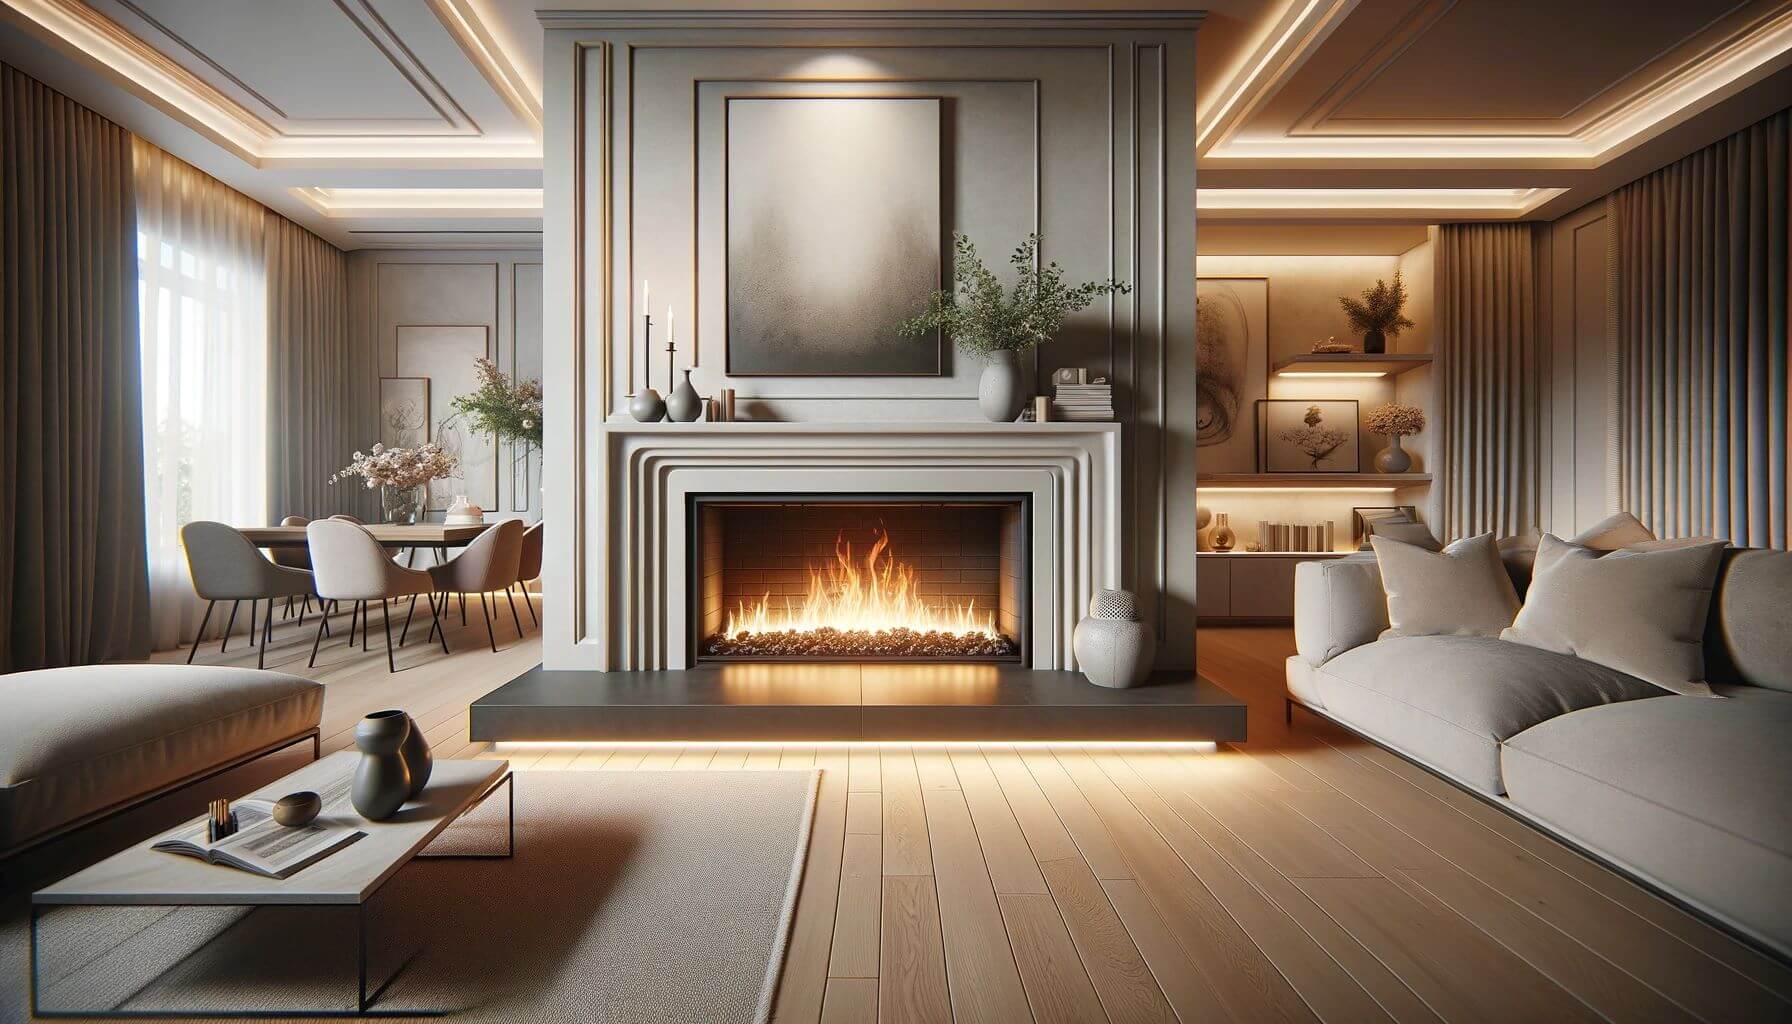 How to Design Fireplace Hearth 50 Stunning Ideas